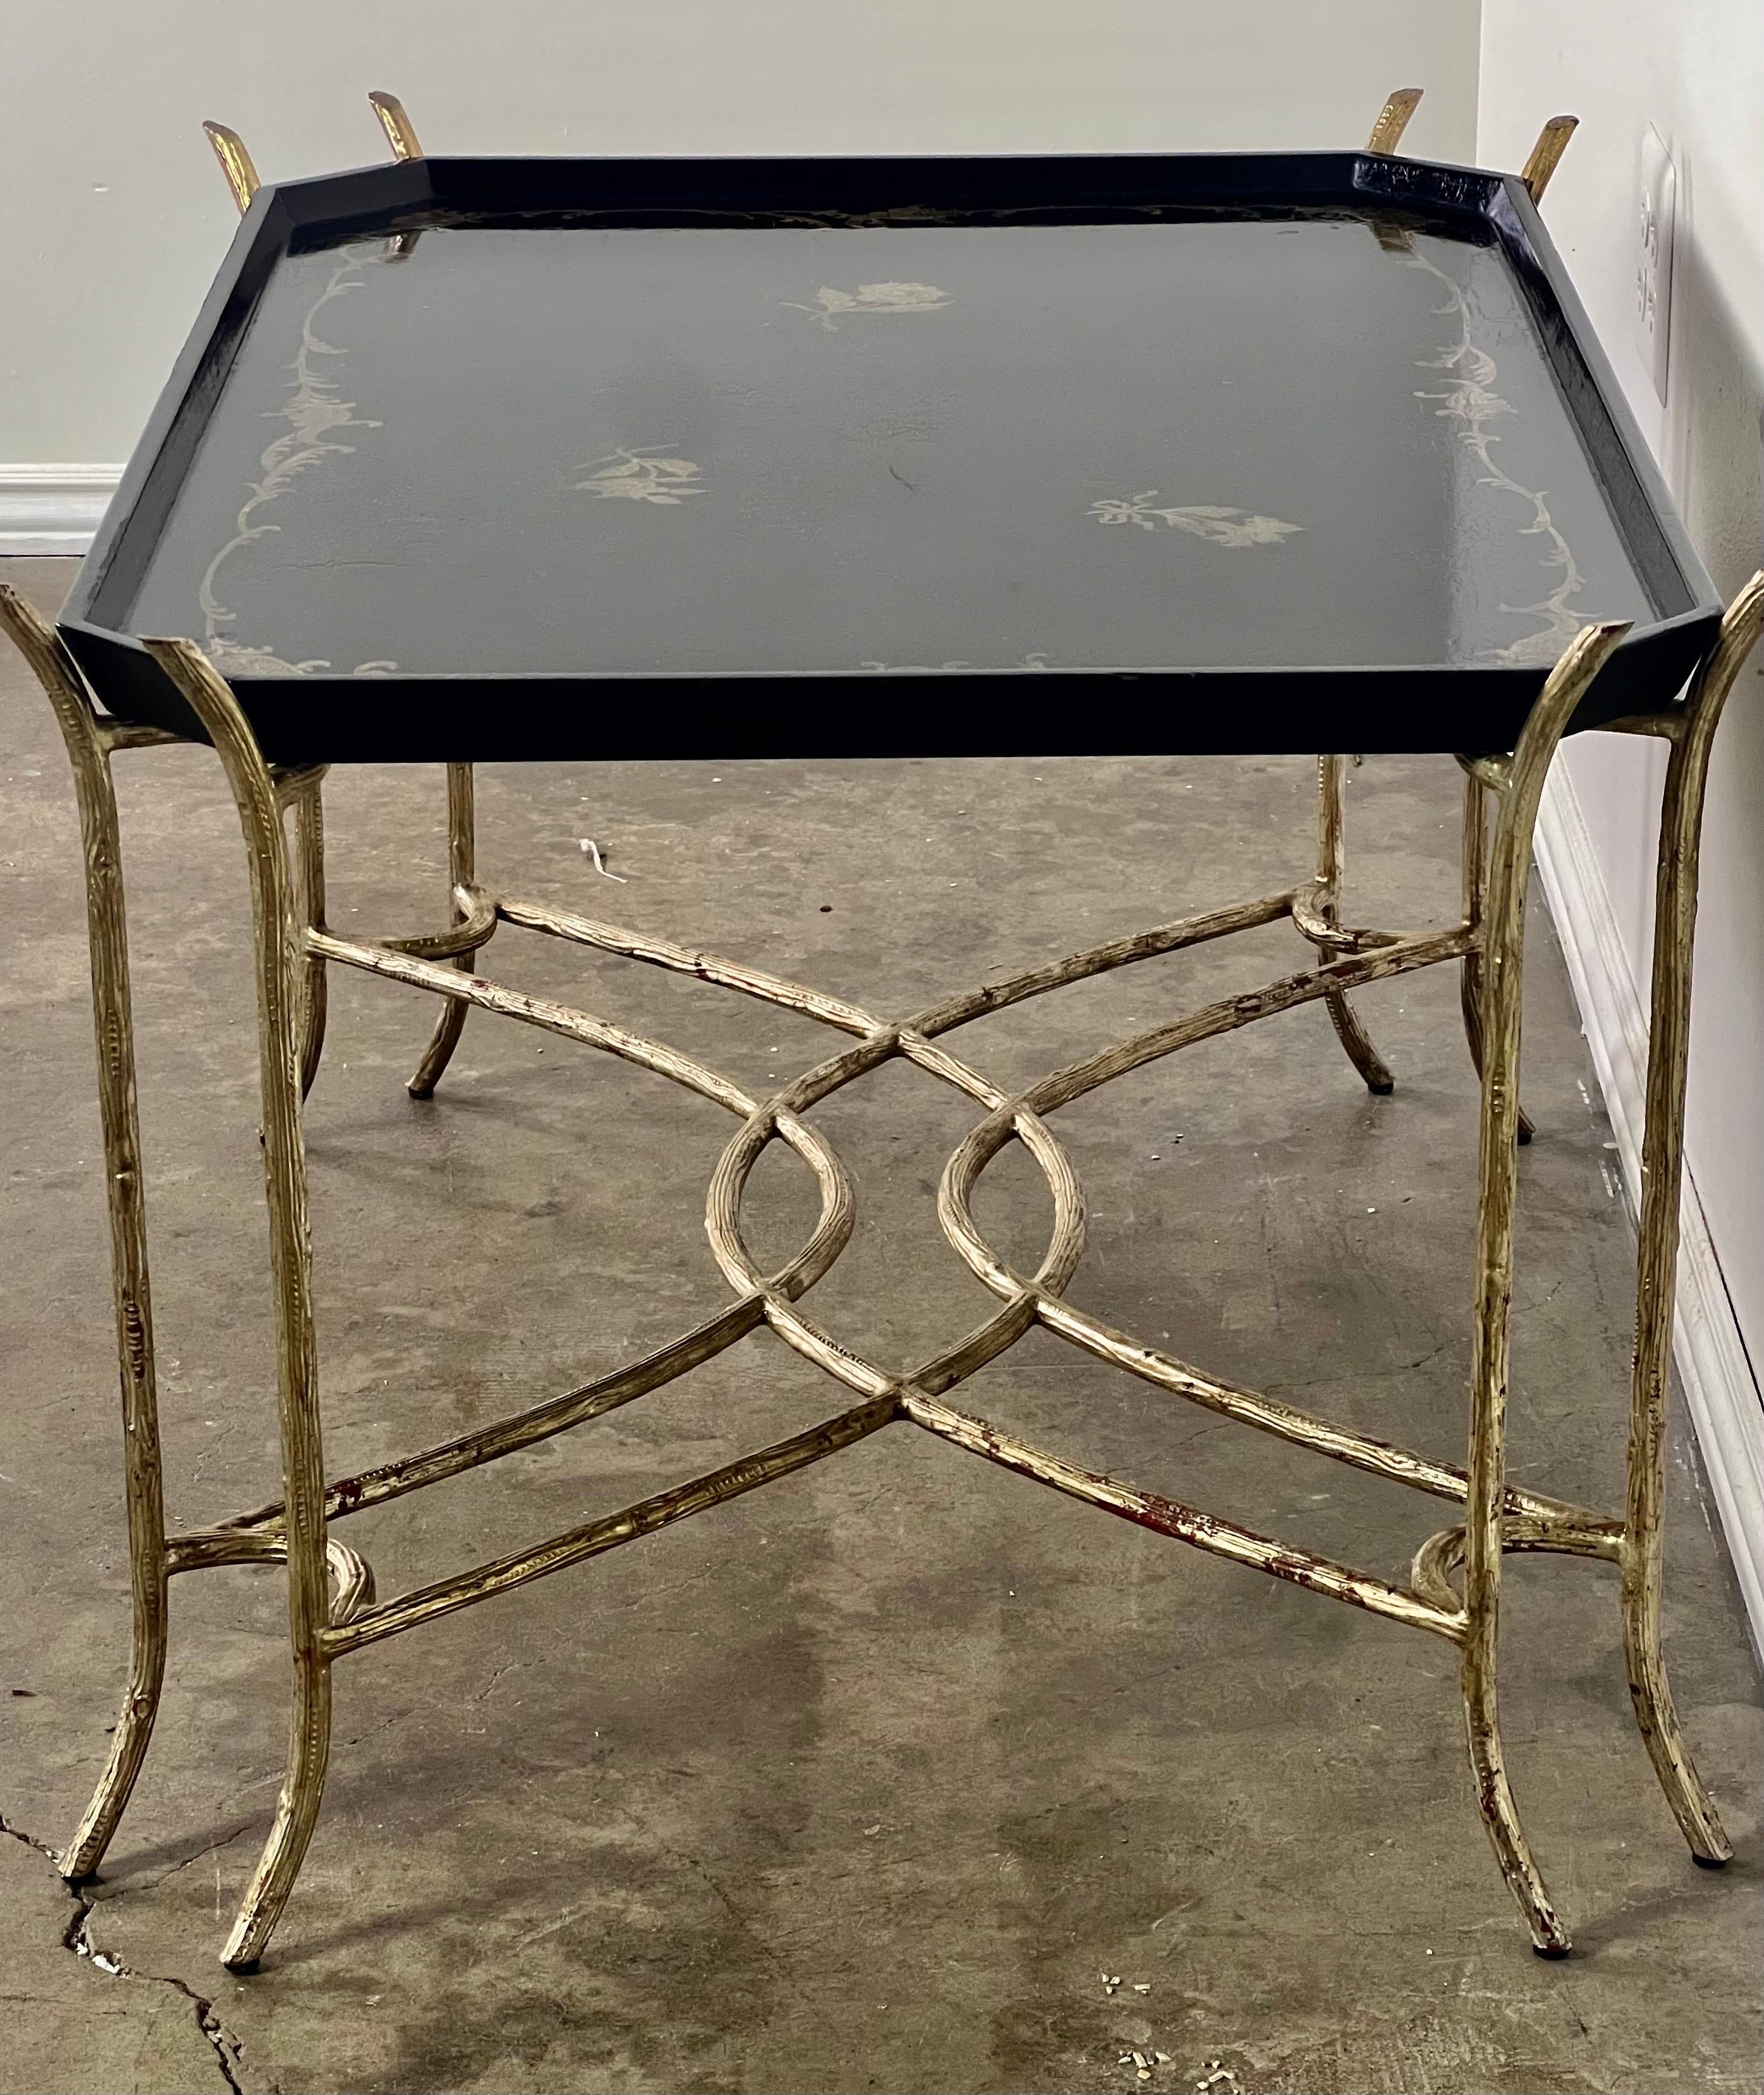 Chinoiserie Lacquered Tea Table on Metal Base by Ebanista For Sale 3